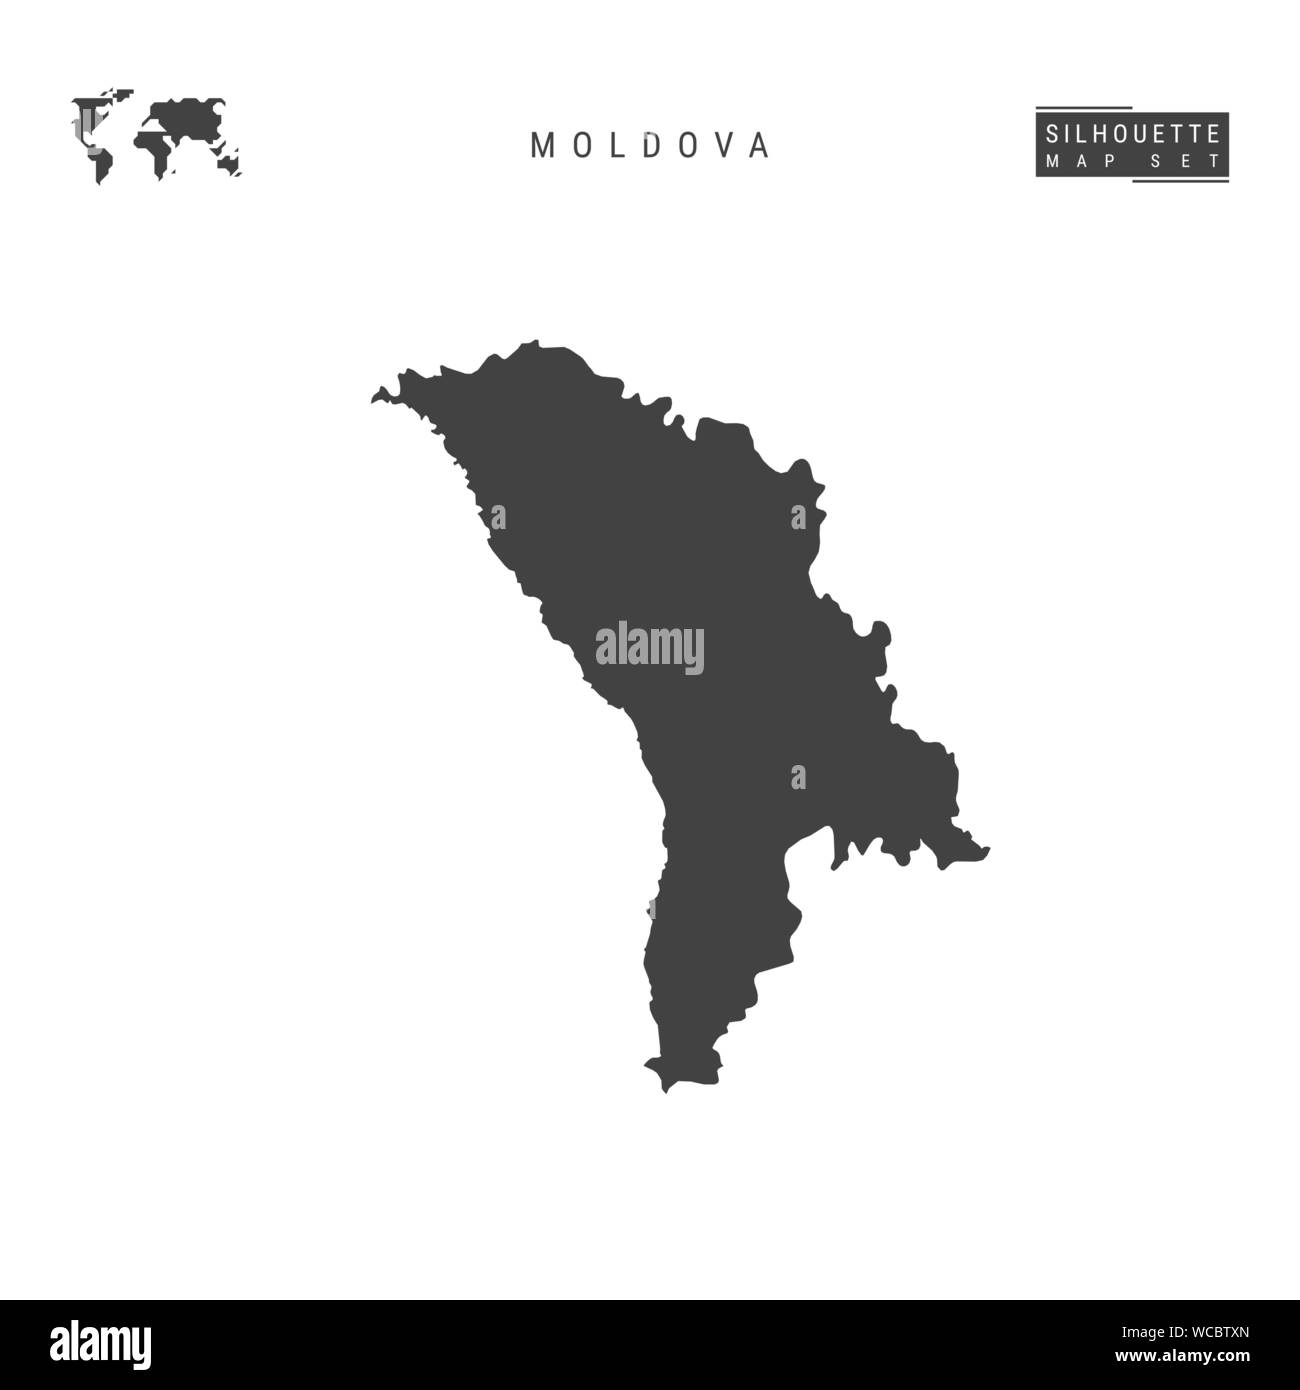 Moldova Blank Vector Map Isolated on White Background. High-Detailed Black Silhouette Map of Moldova. Stock Vector